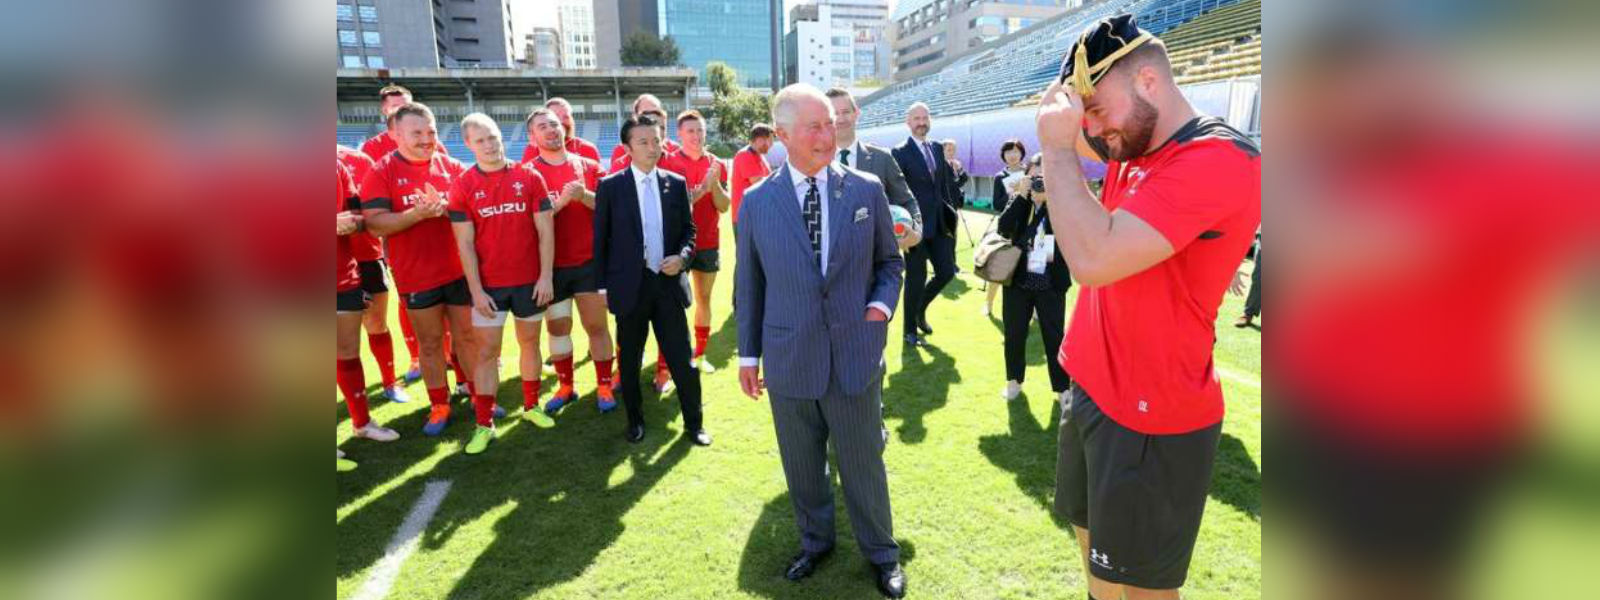 Prince Charles attends Wales rugby training session in Tokyo